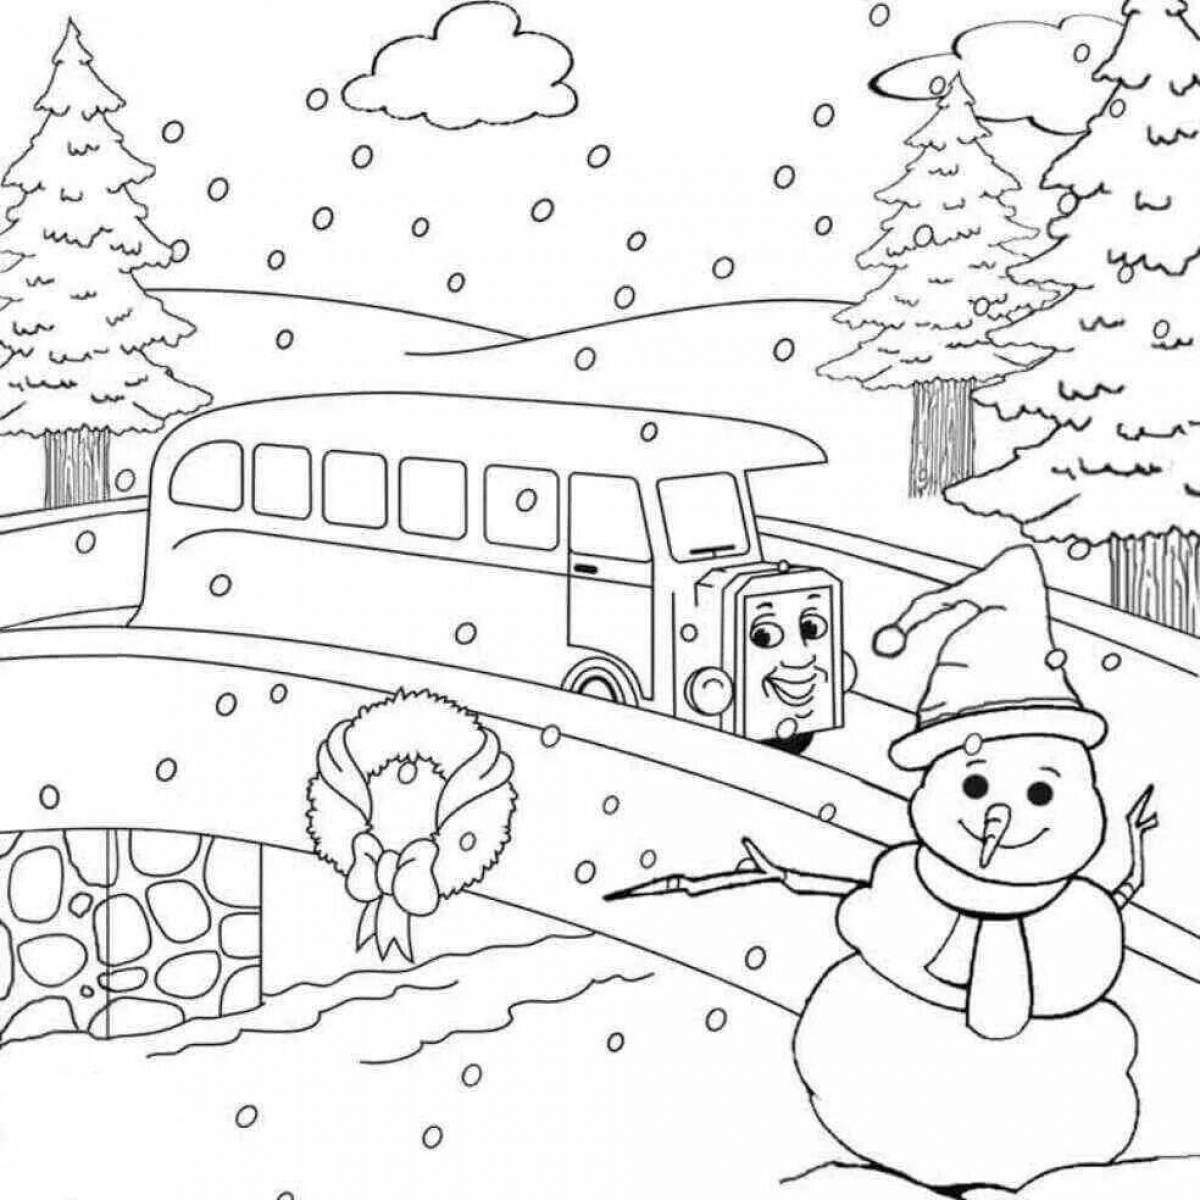 Violent winter coloring for children 6-7 years old